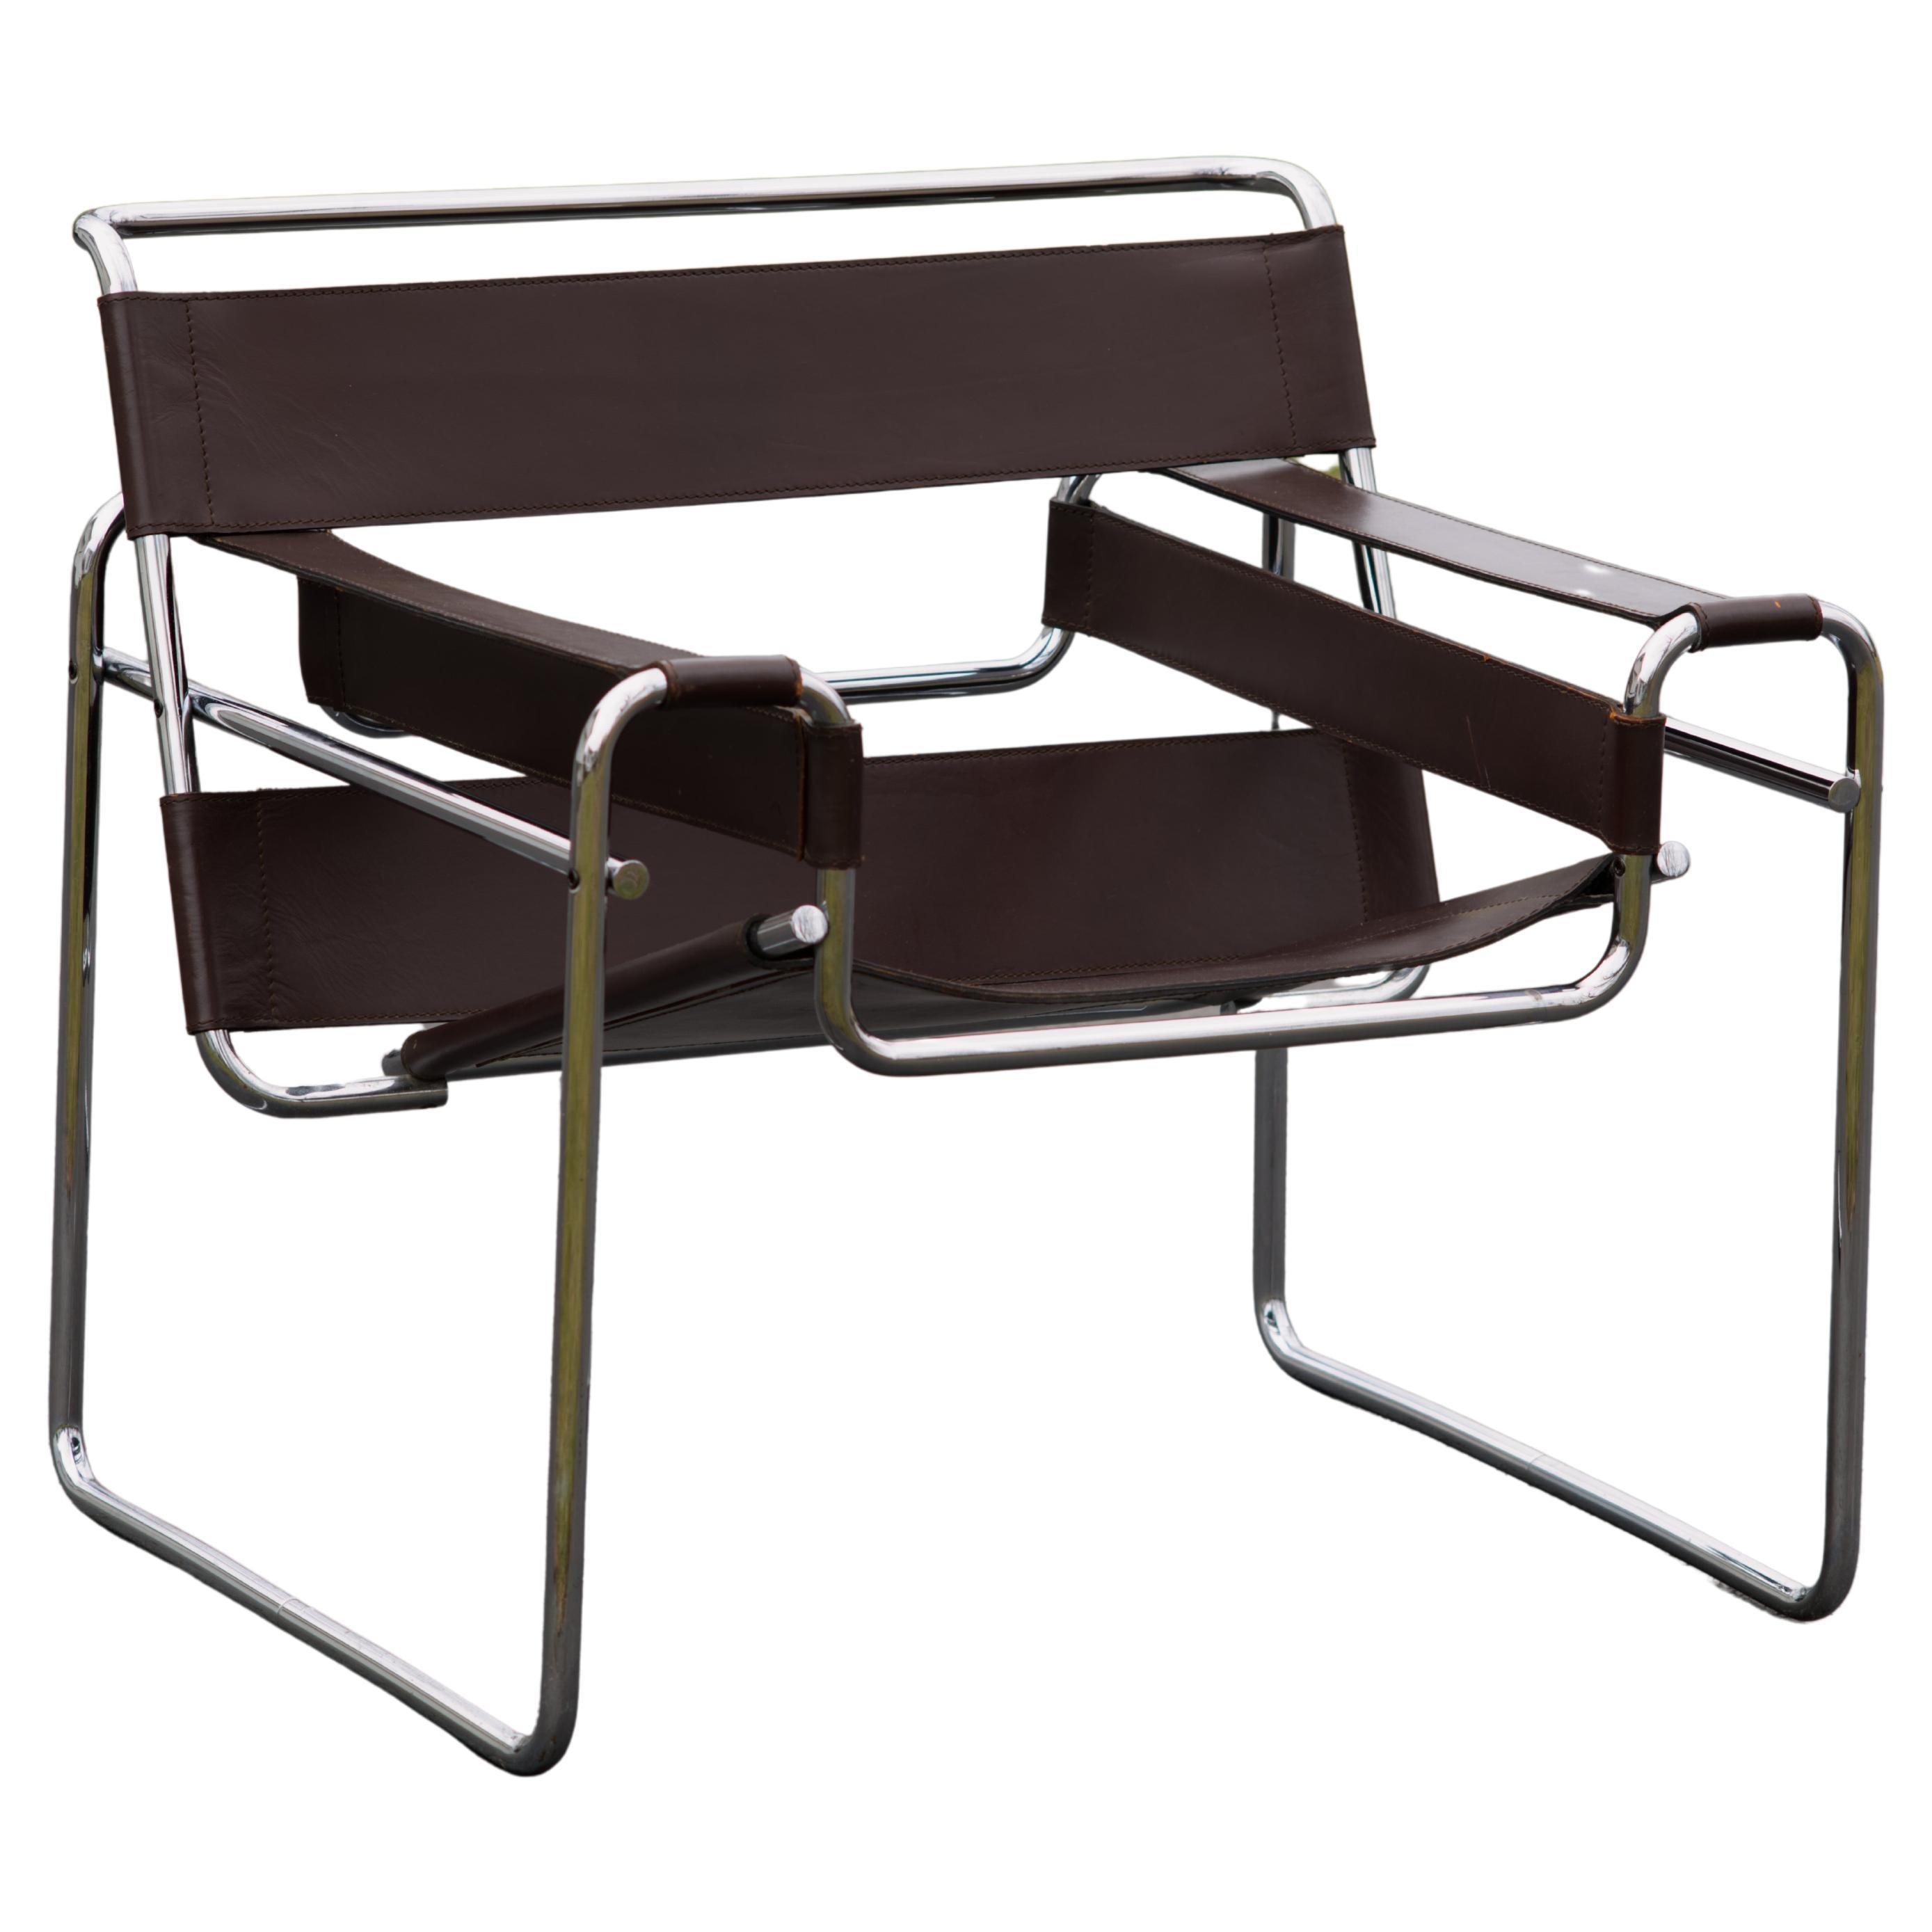 Marcel Breuer Wassily Brown Leather and Chrome  Lounge Chair by Knoll